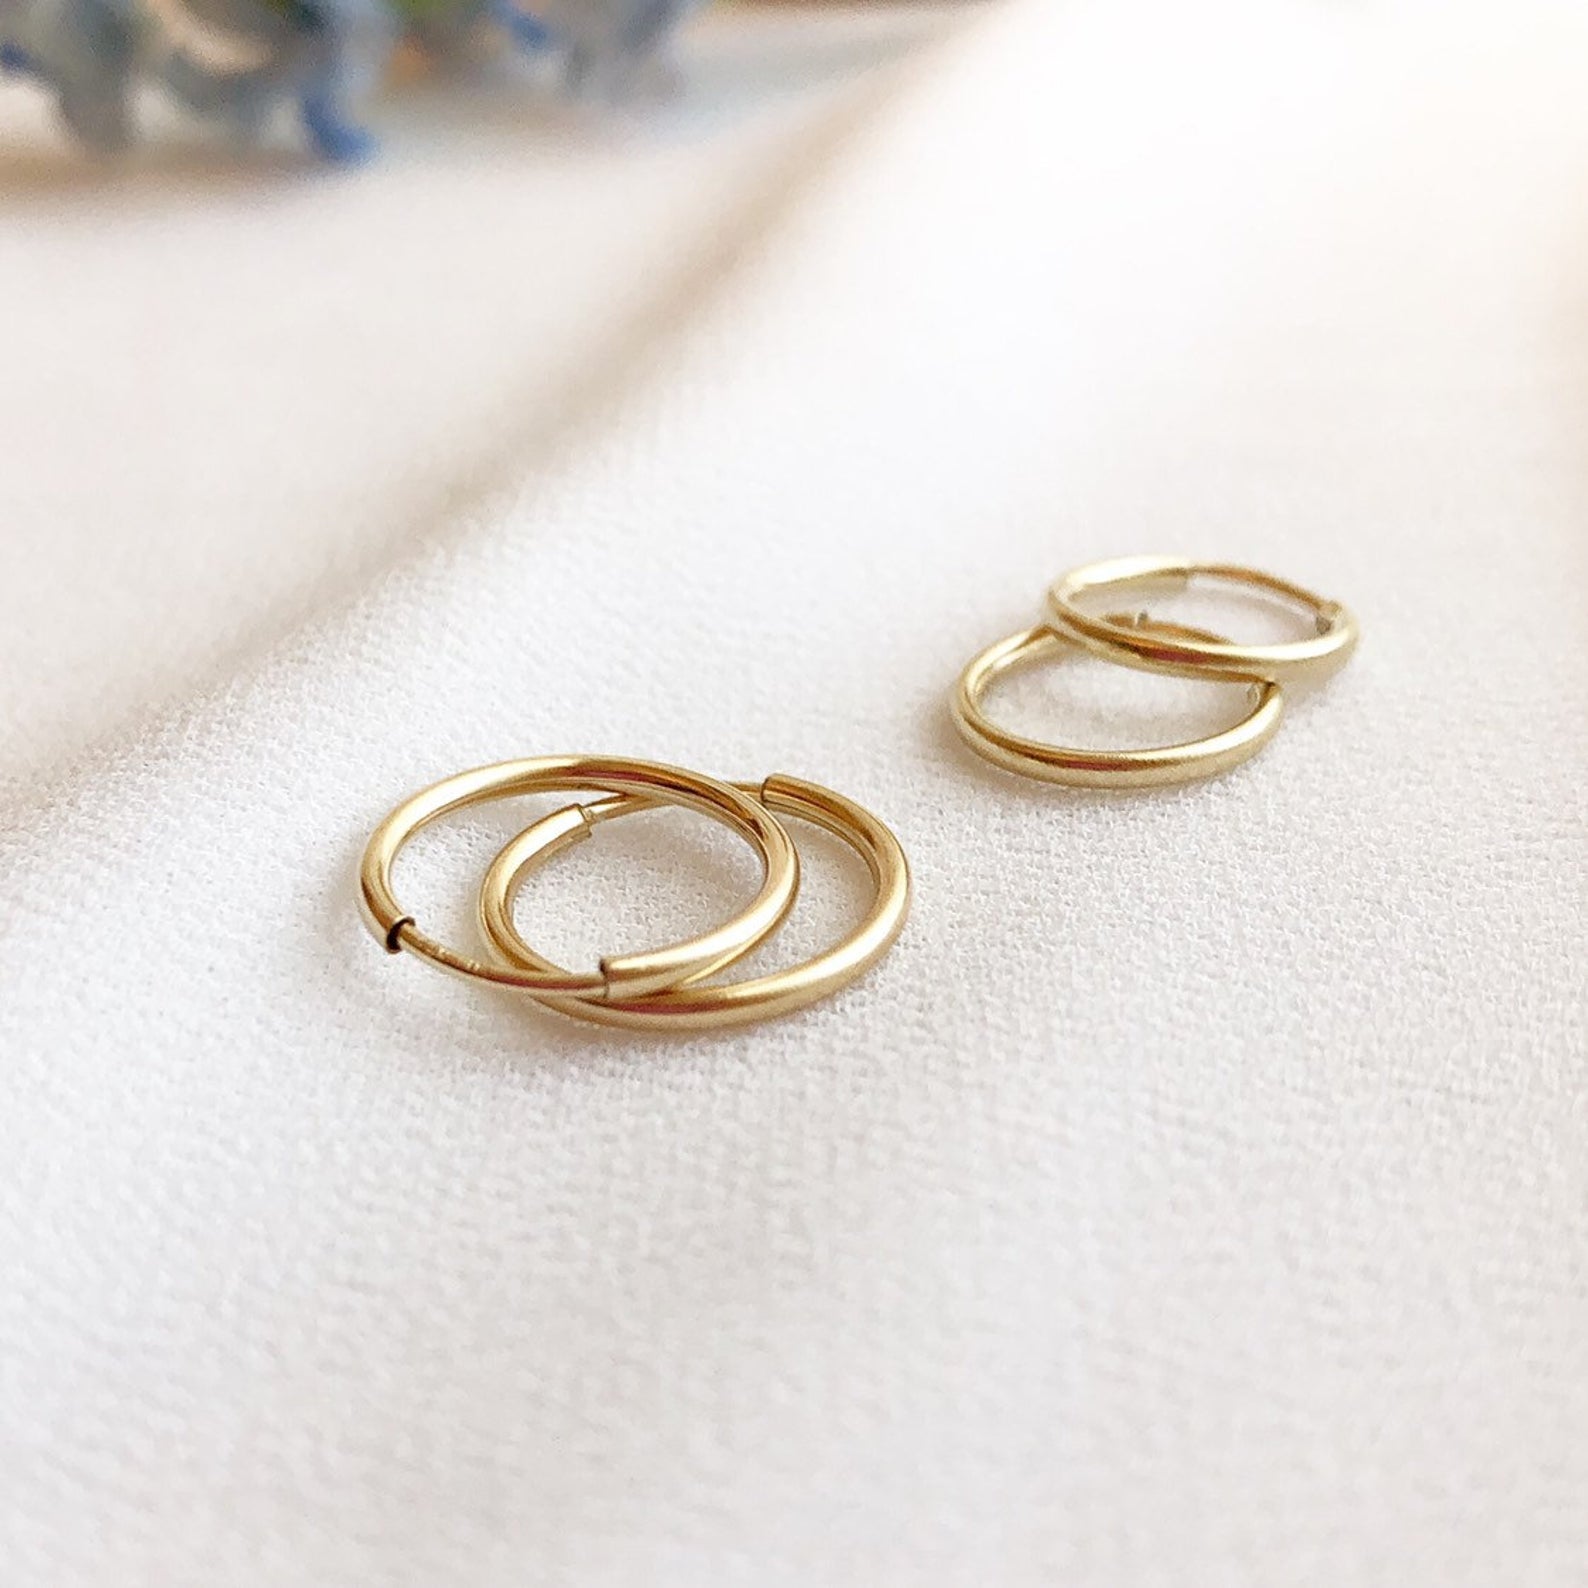 Small Hoop Earrings, Endless Hoop Earrings, Tiny Hoop Earrings, Available 14K Solid Yellow Gold and 14K Gold filled, Gold Hoop Earrings, Office Outfit, Delicate Jewelry, Mothers Gift, Coco Wagner Jewelry, Gift For Her, Gift Ideas,  Birthday Gift, Mothers Gift, Christmas Gift Ideas, Mothers Day Gift  Minimalist Jewelry, Everyday Jewelry, 